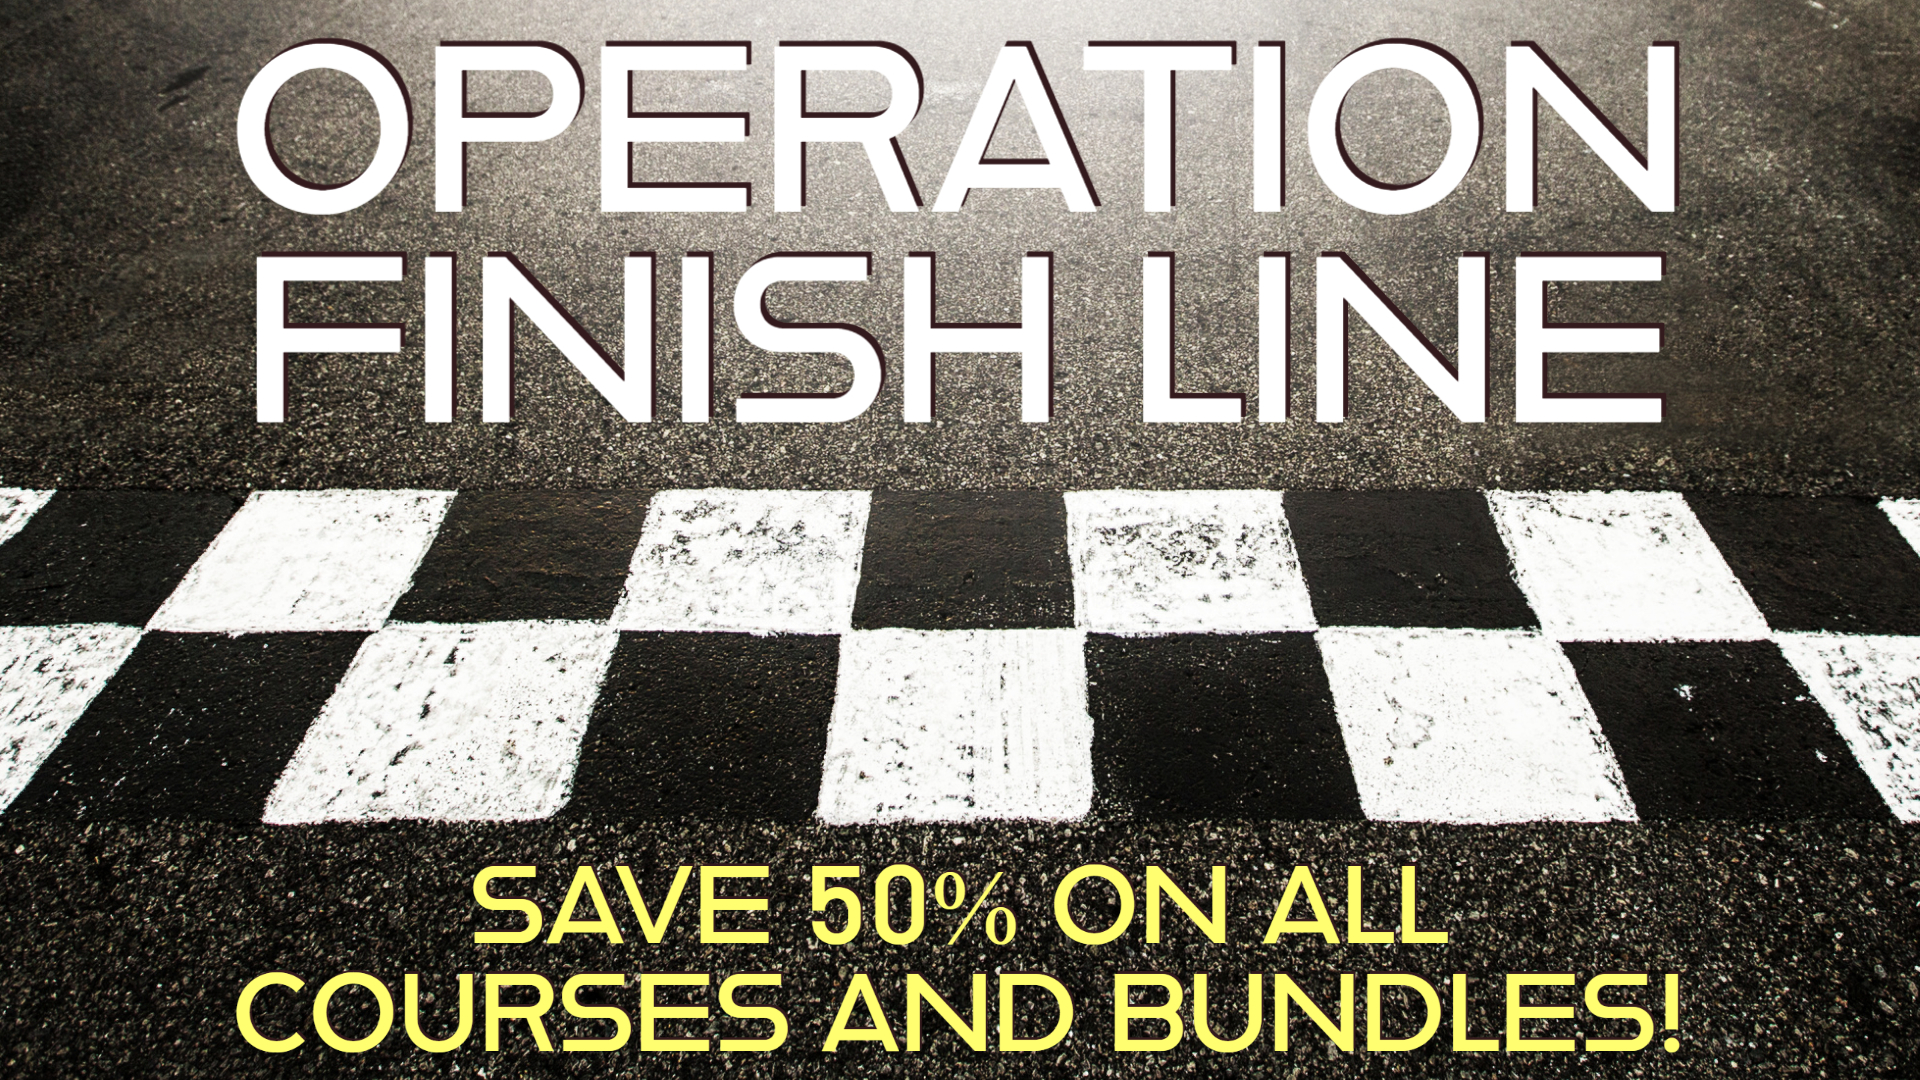 Operation Finish Line - Save 50% on all courses and bundles!